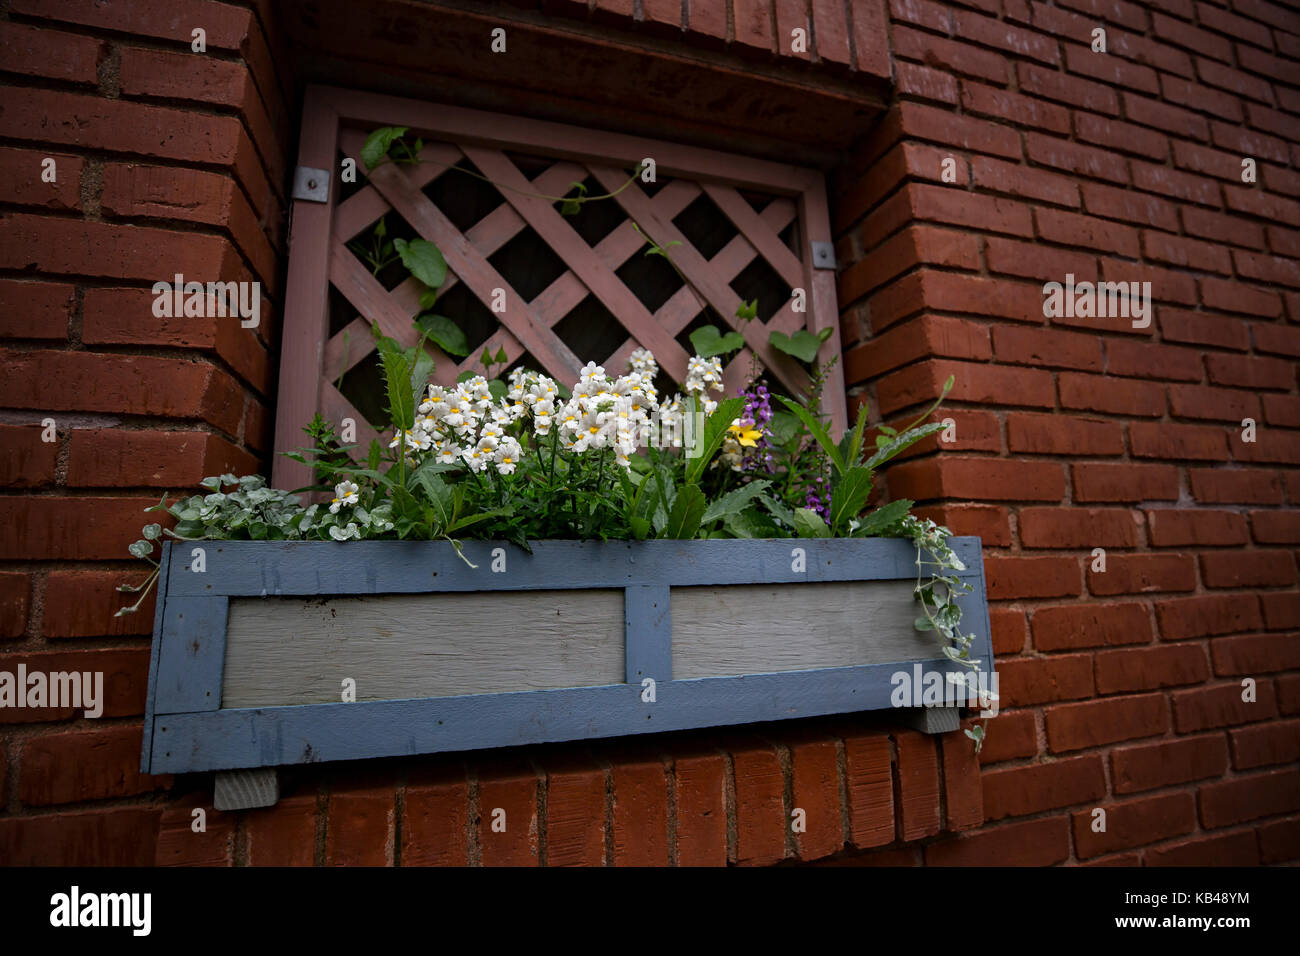 Flower planter on wall Stock Photo